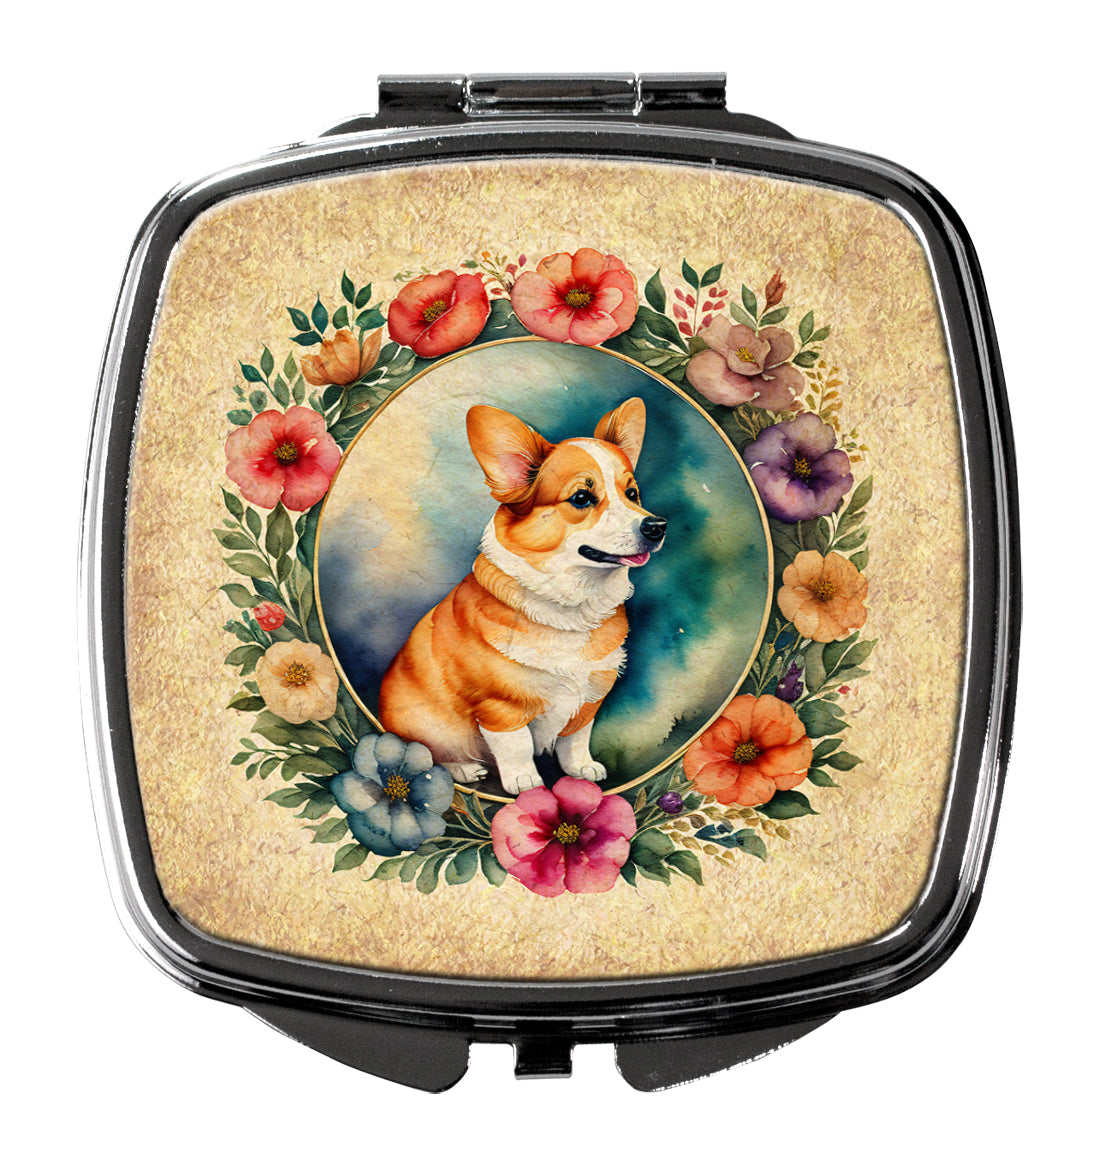 Buy this Corgi and Flowers Compact Mirror